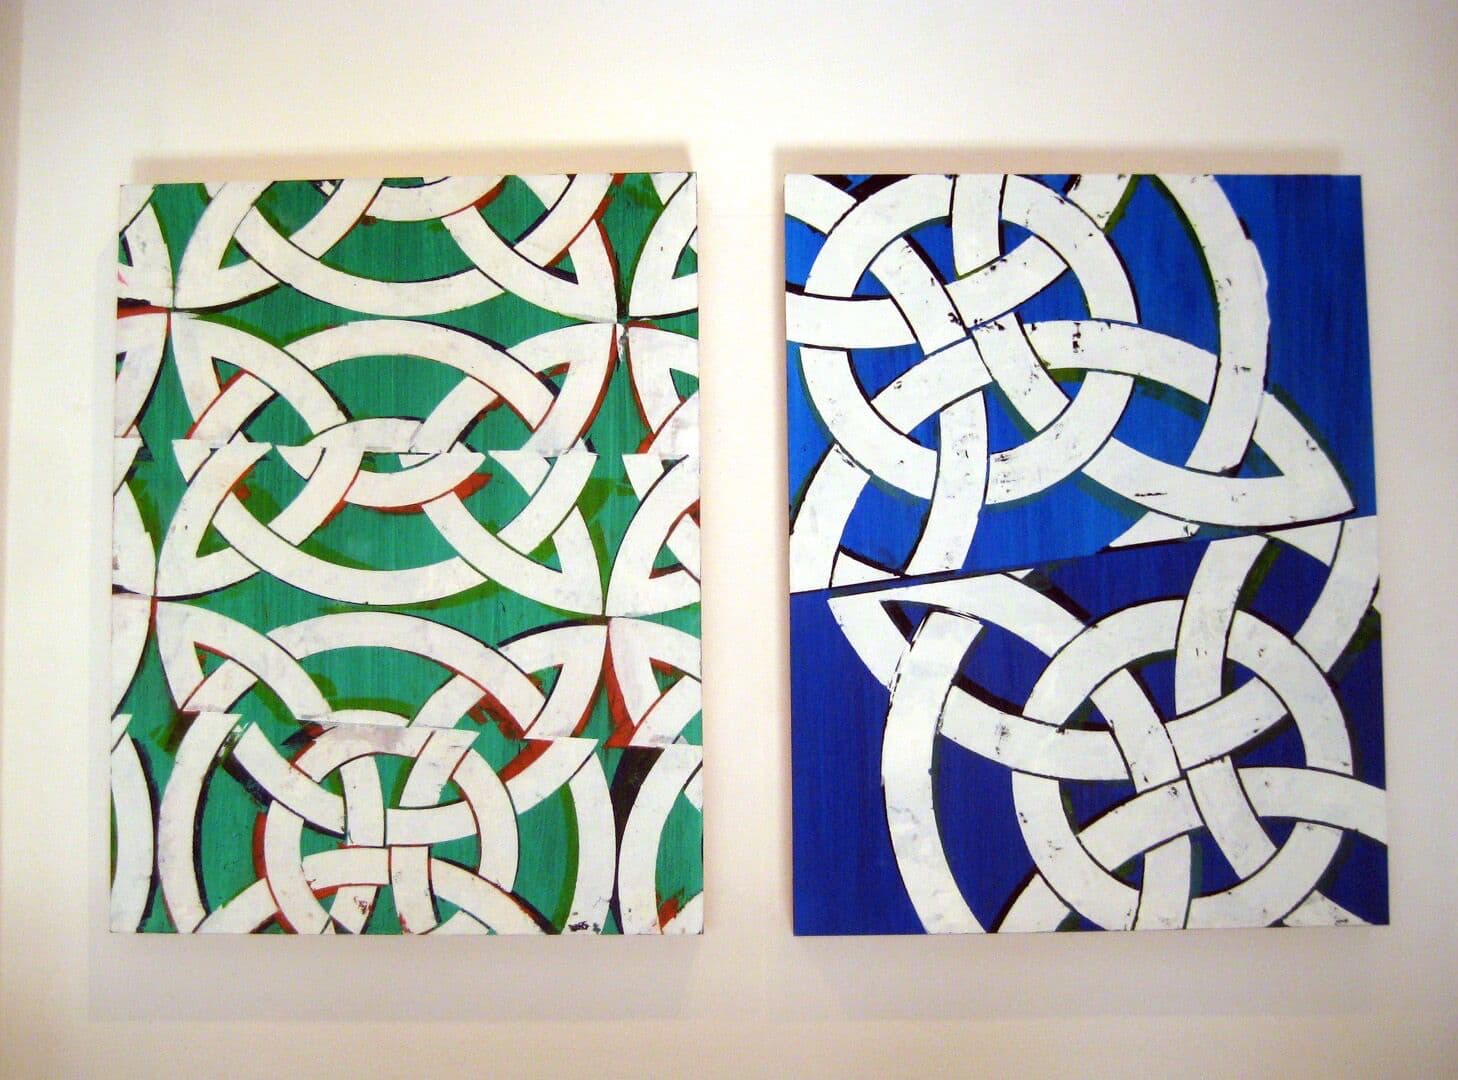 Blue Cheer Moroccan interlocking pattern in white and royal blue. Augustus  Owsley Stanley III-inspired title by Margaret Lanzetta